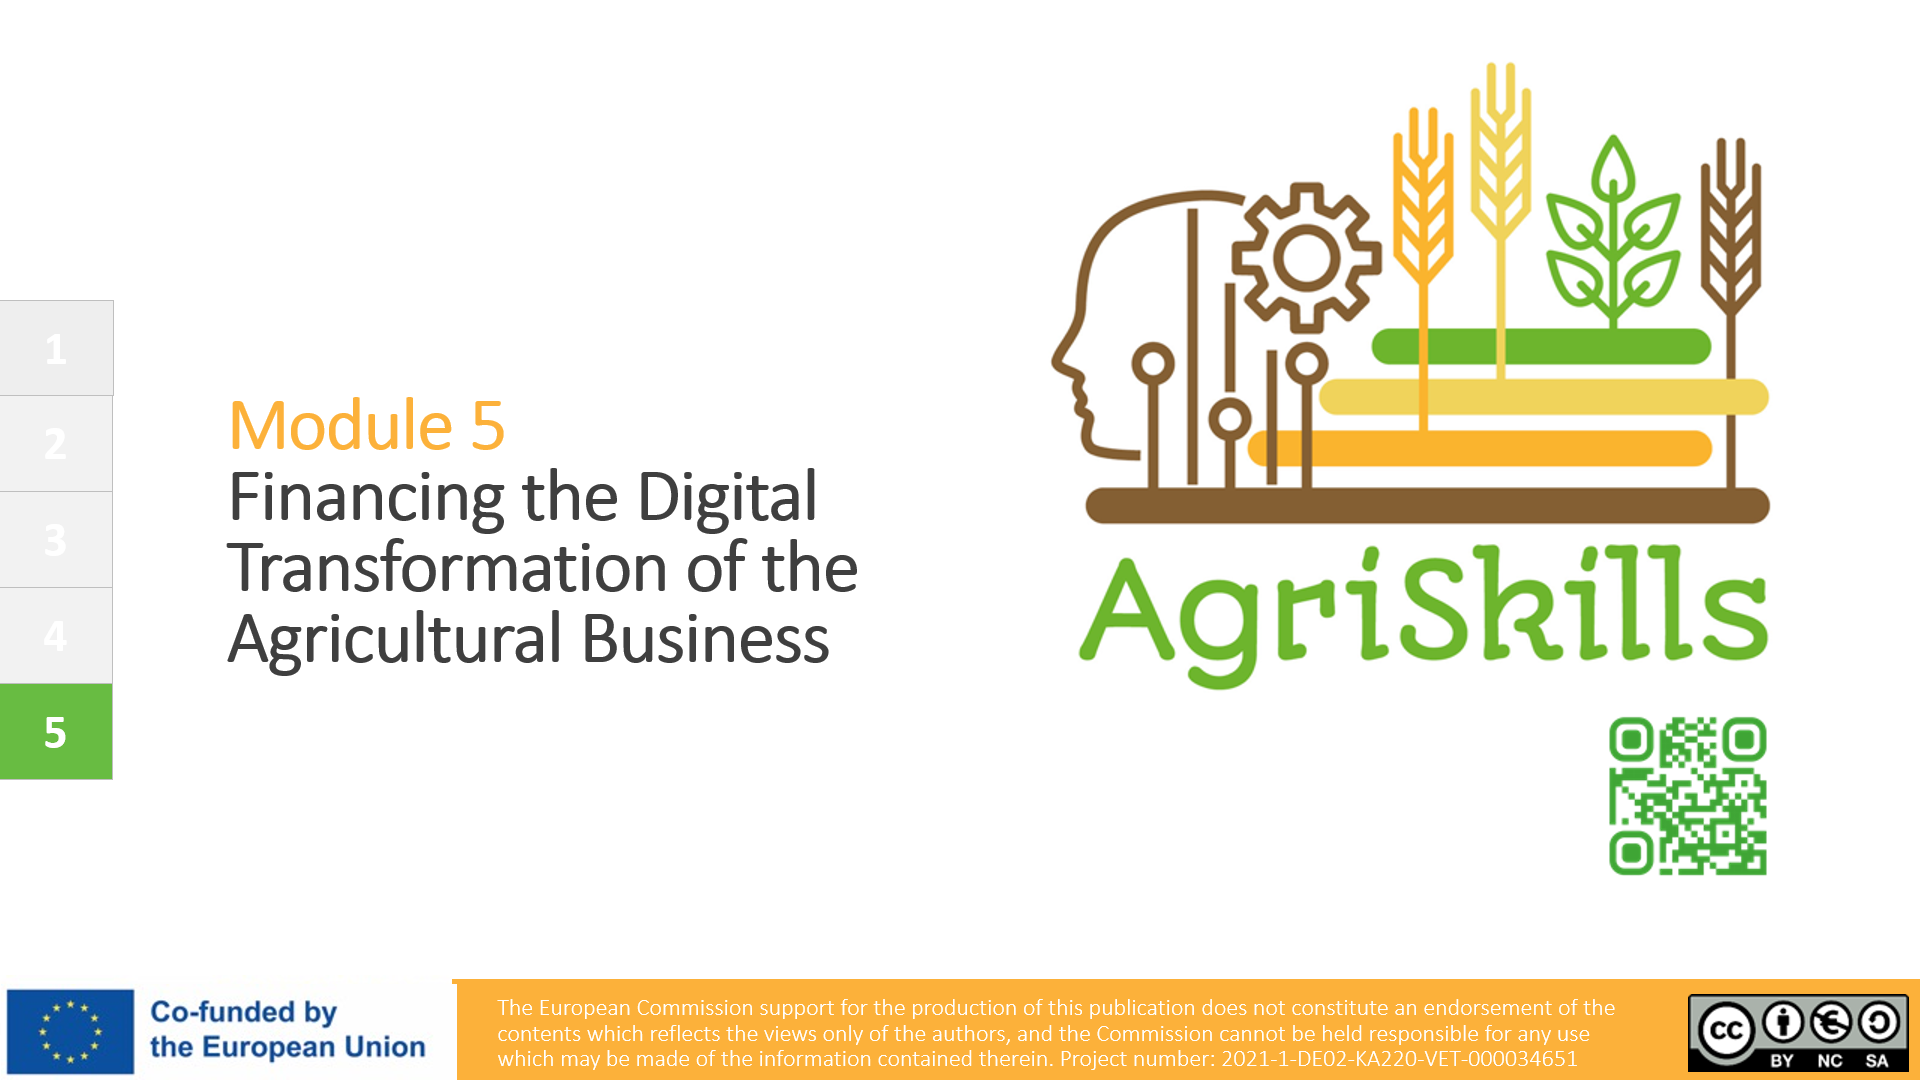 Financing the Digital Transformation of the Agricultural Business